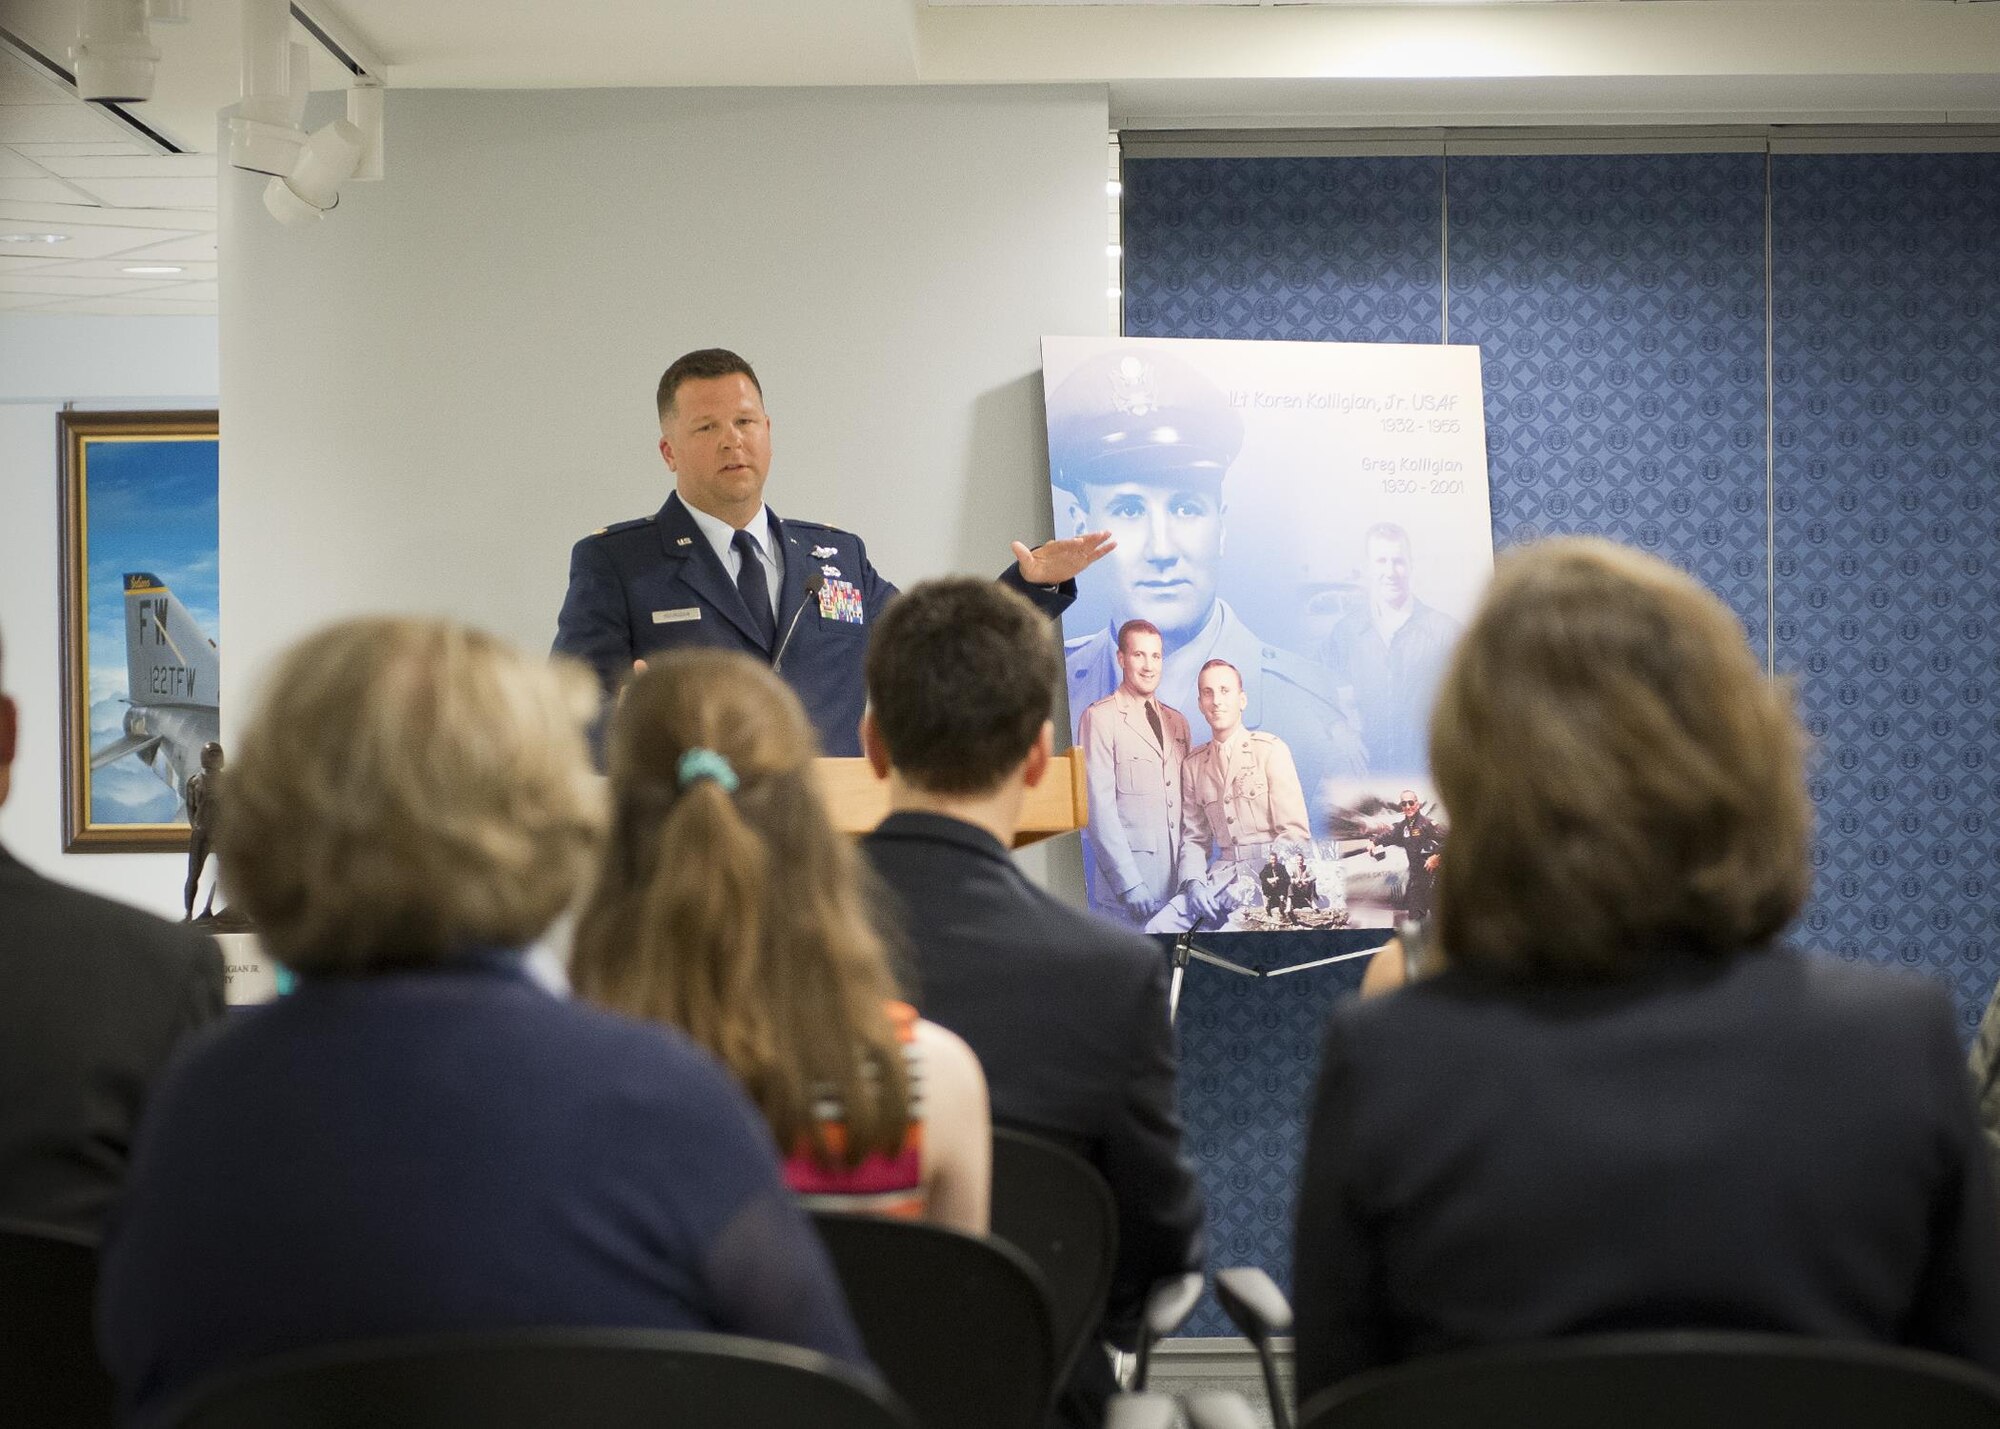 Maj. John Hourigan, a 123rd Operations Support Squadron C-130 Hercules pilot, speaks after receiving the Koren Kolligian Trophy during ceremony in the Pentagon, Washington, D.C., May 17, 2017. On July 15, 2016, Hourigan’s aircraft began vibrating so badly that crew members were unable to communicate with each other through their headsets, read gauges or flight instruments. Hourigan quickly determined the source of vibration, implemented corrective action and executed an engine-out landing, saving the lives of all six crew members on board. (U.S. Air National Guard photo by Master. Sgt. Marvin R. Preston)